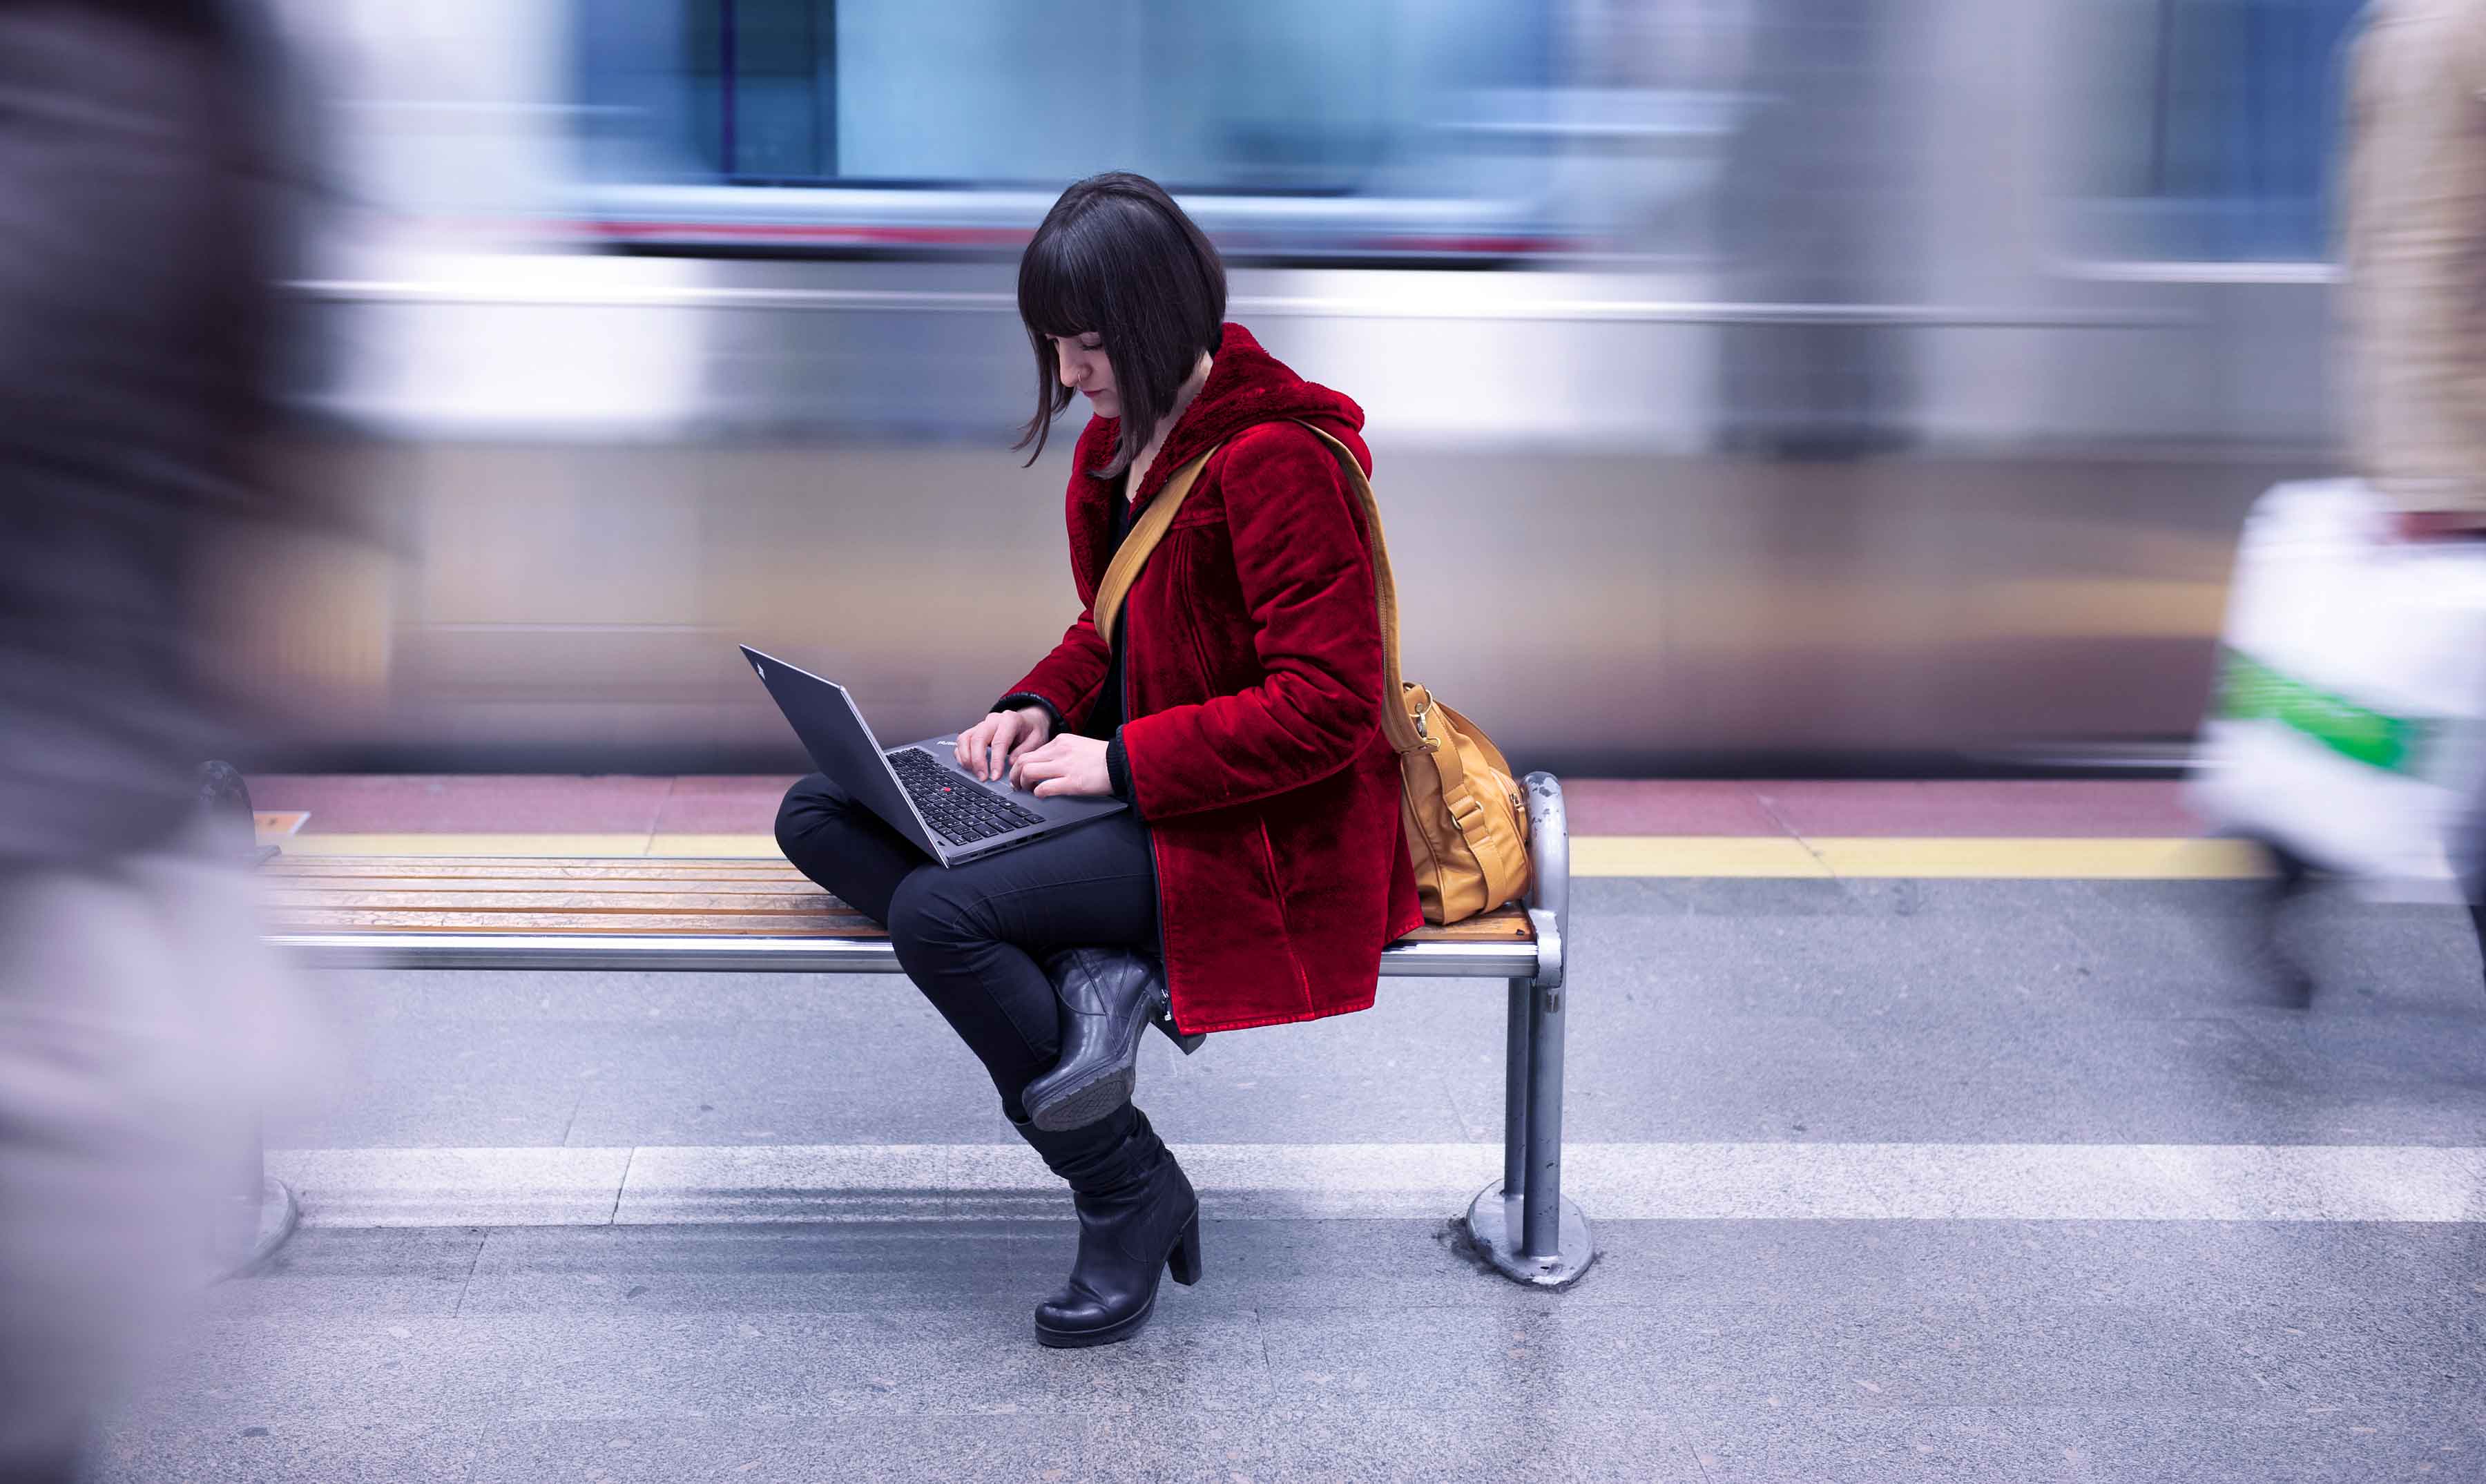 A woman working on a Lenovo laptop while sitting on a bench in a subway station, as a train zooms past behind her.